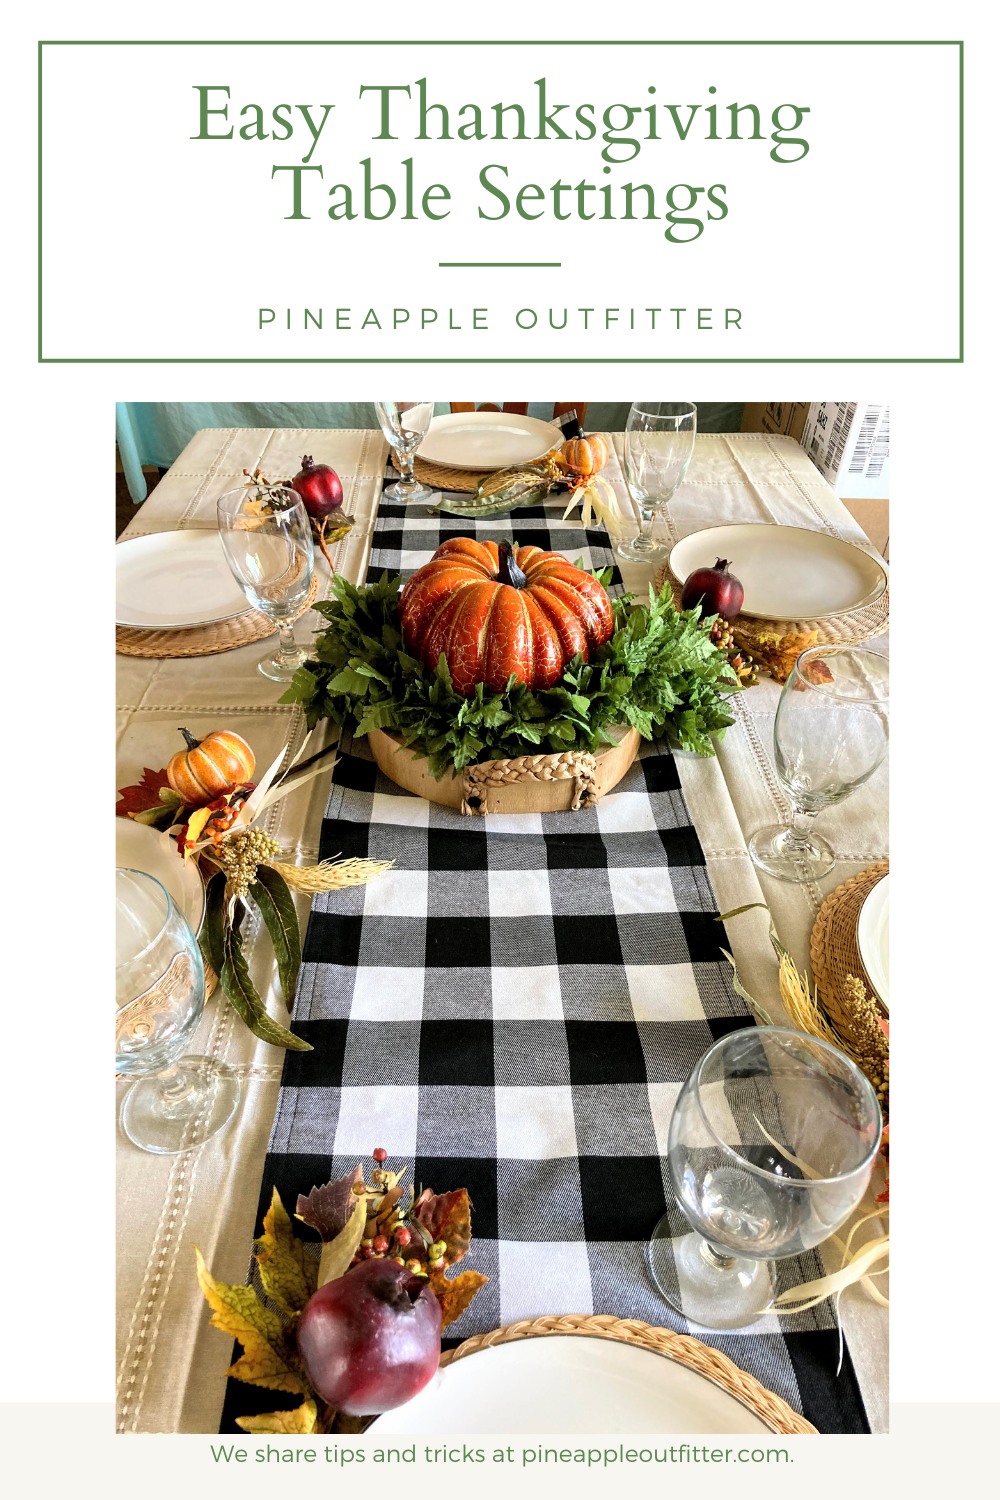 Easy Thanksgiving Table Settings that you can put together with items you already have.